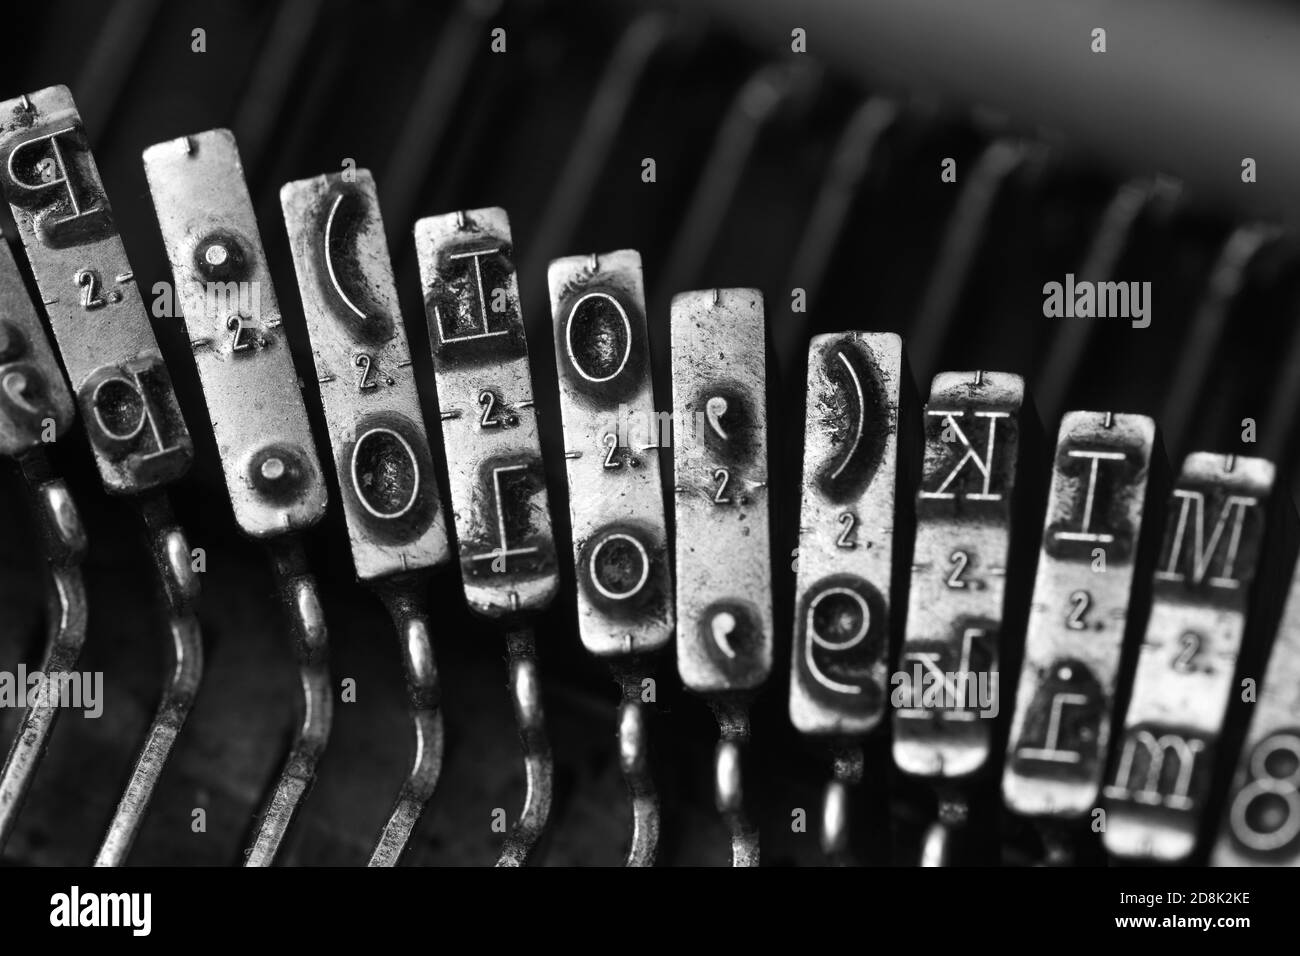 details of typewriter hammers showing various letters, numbers and symbols Stock Photo